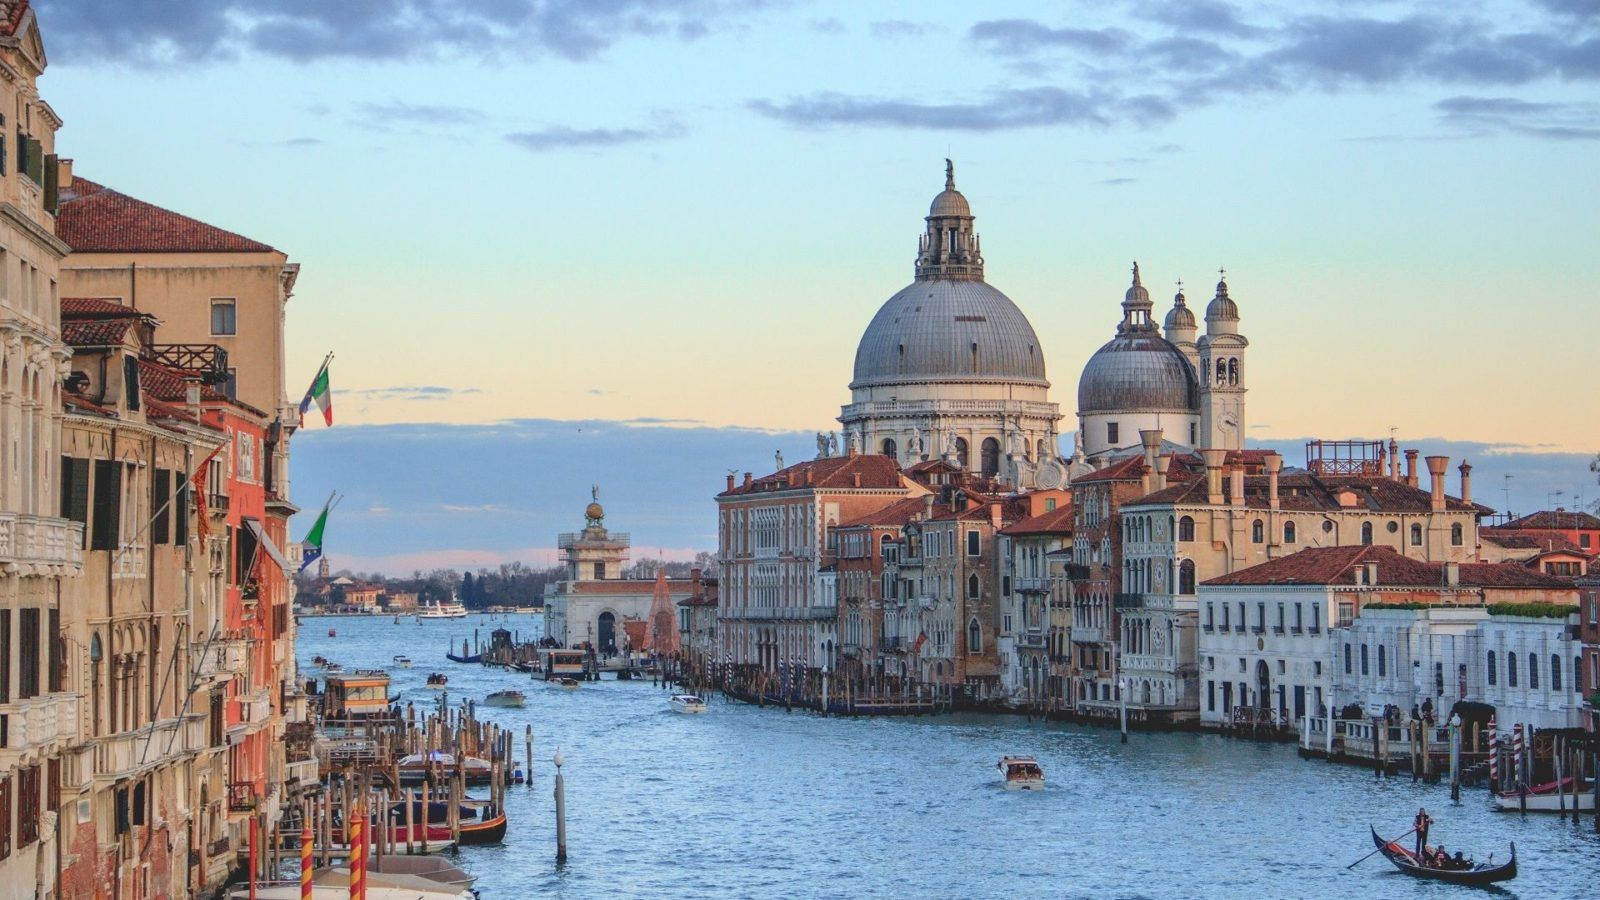 Venice to charge entry fee from most visitors to prevent overcrowding